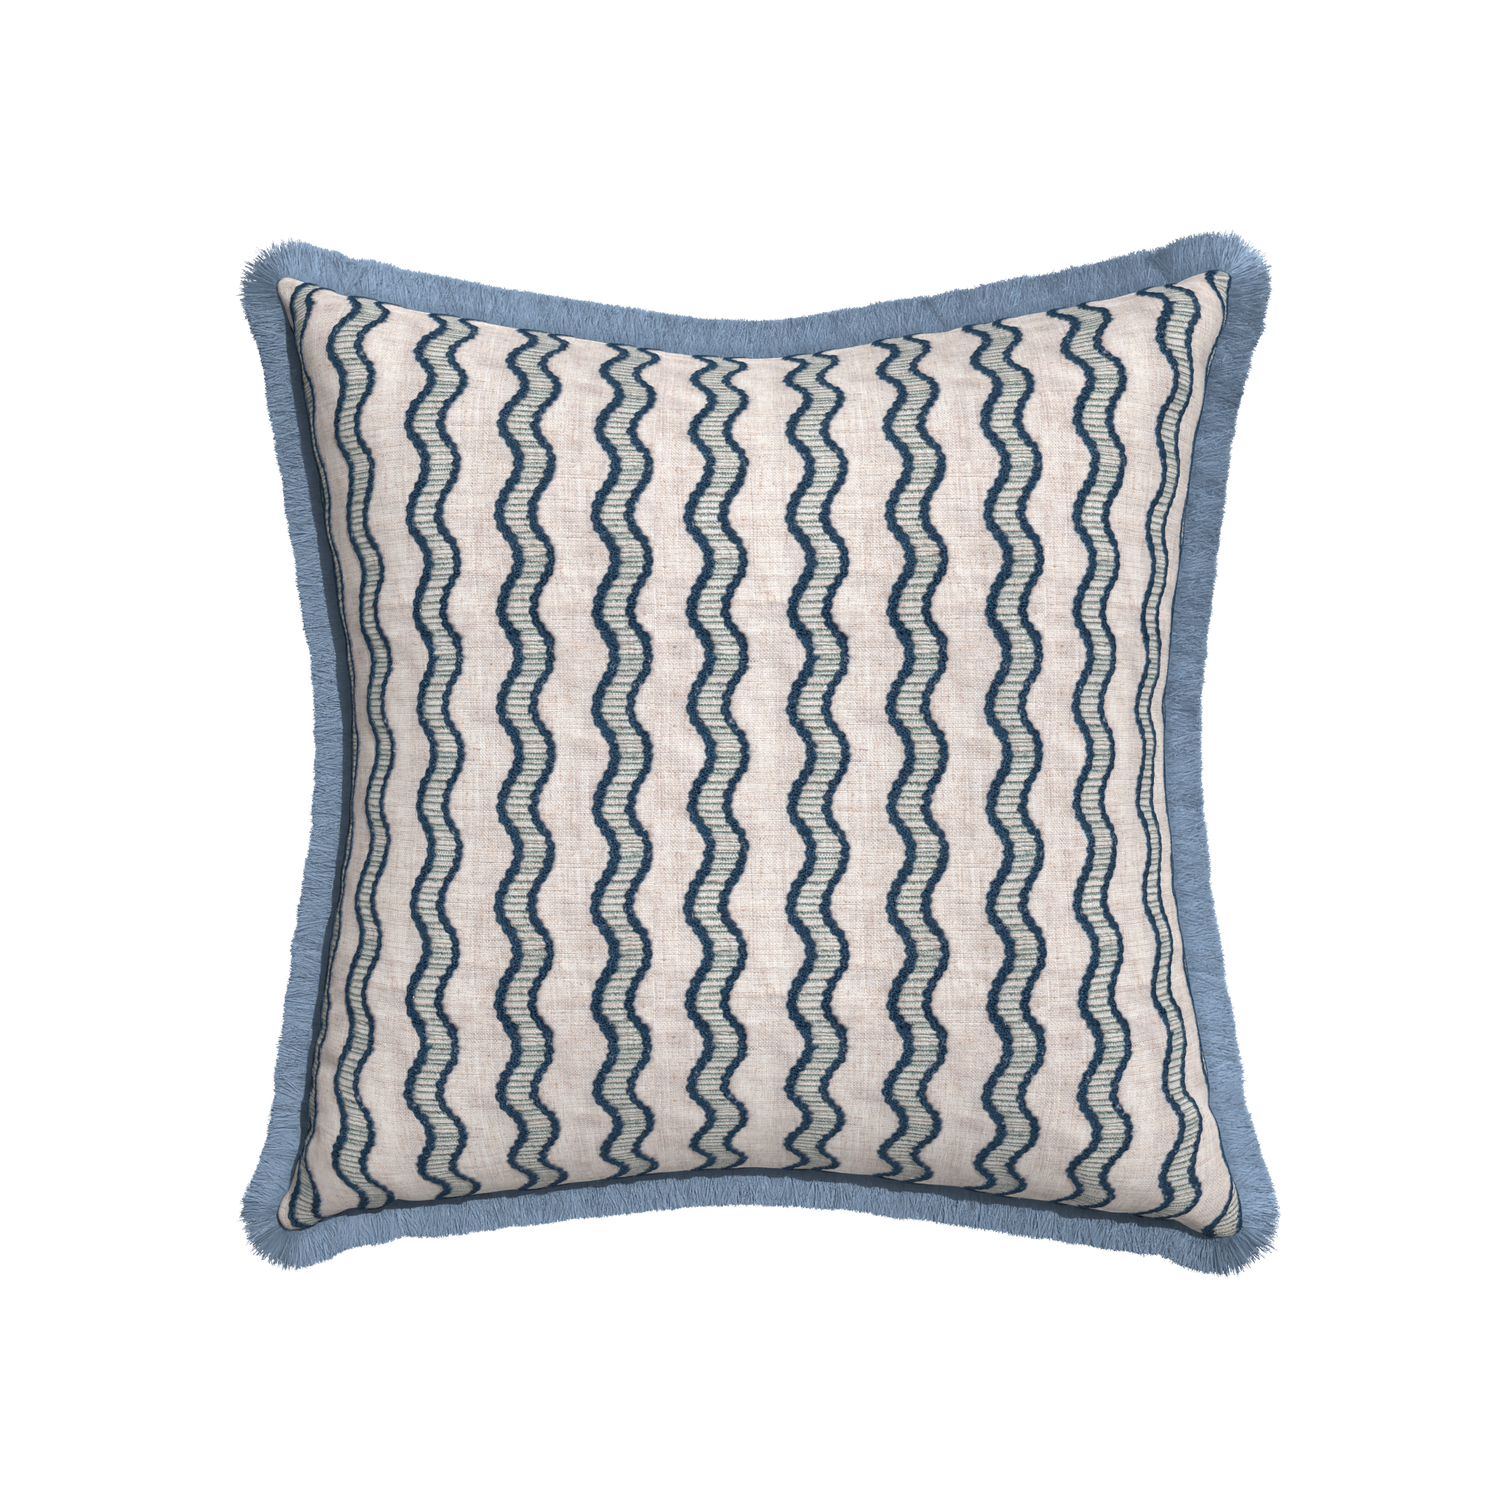 22-square beatrice custom embroidered wavepillow with sky fringe on white background